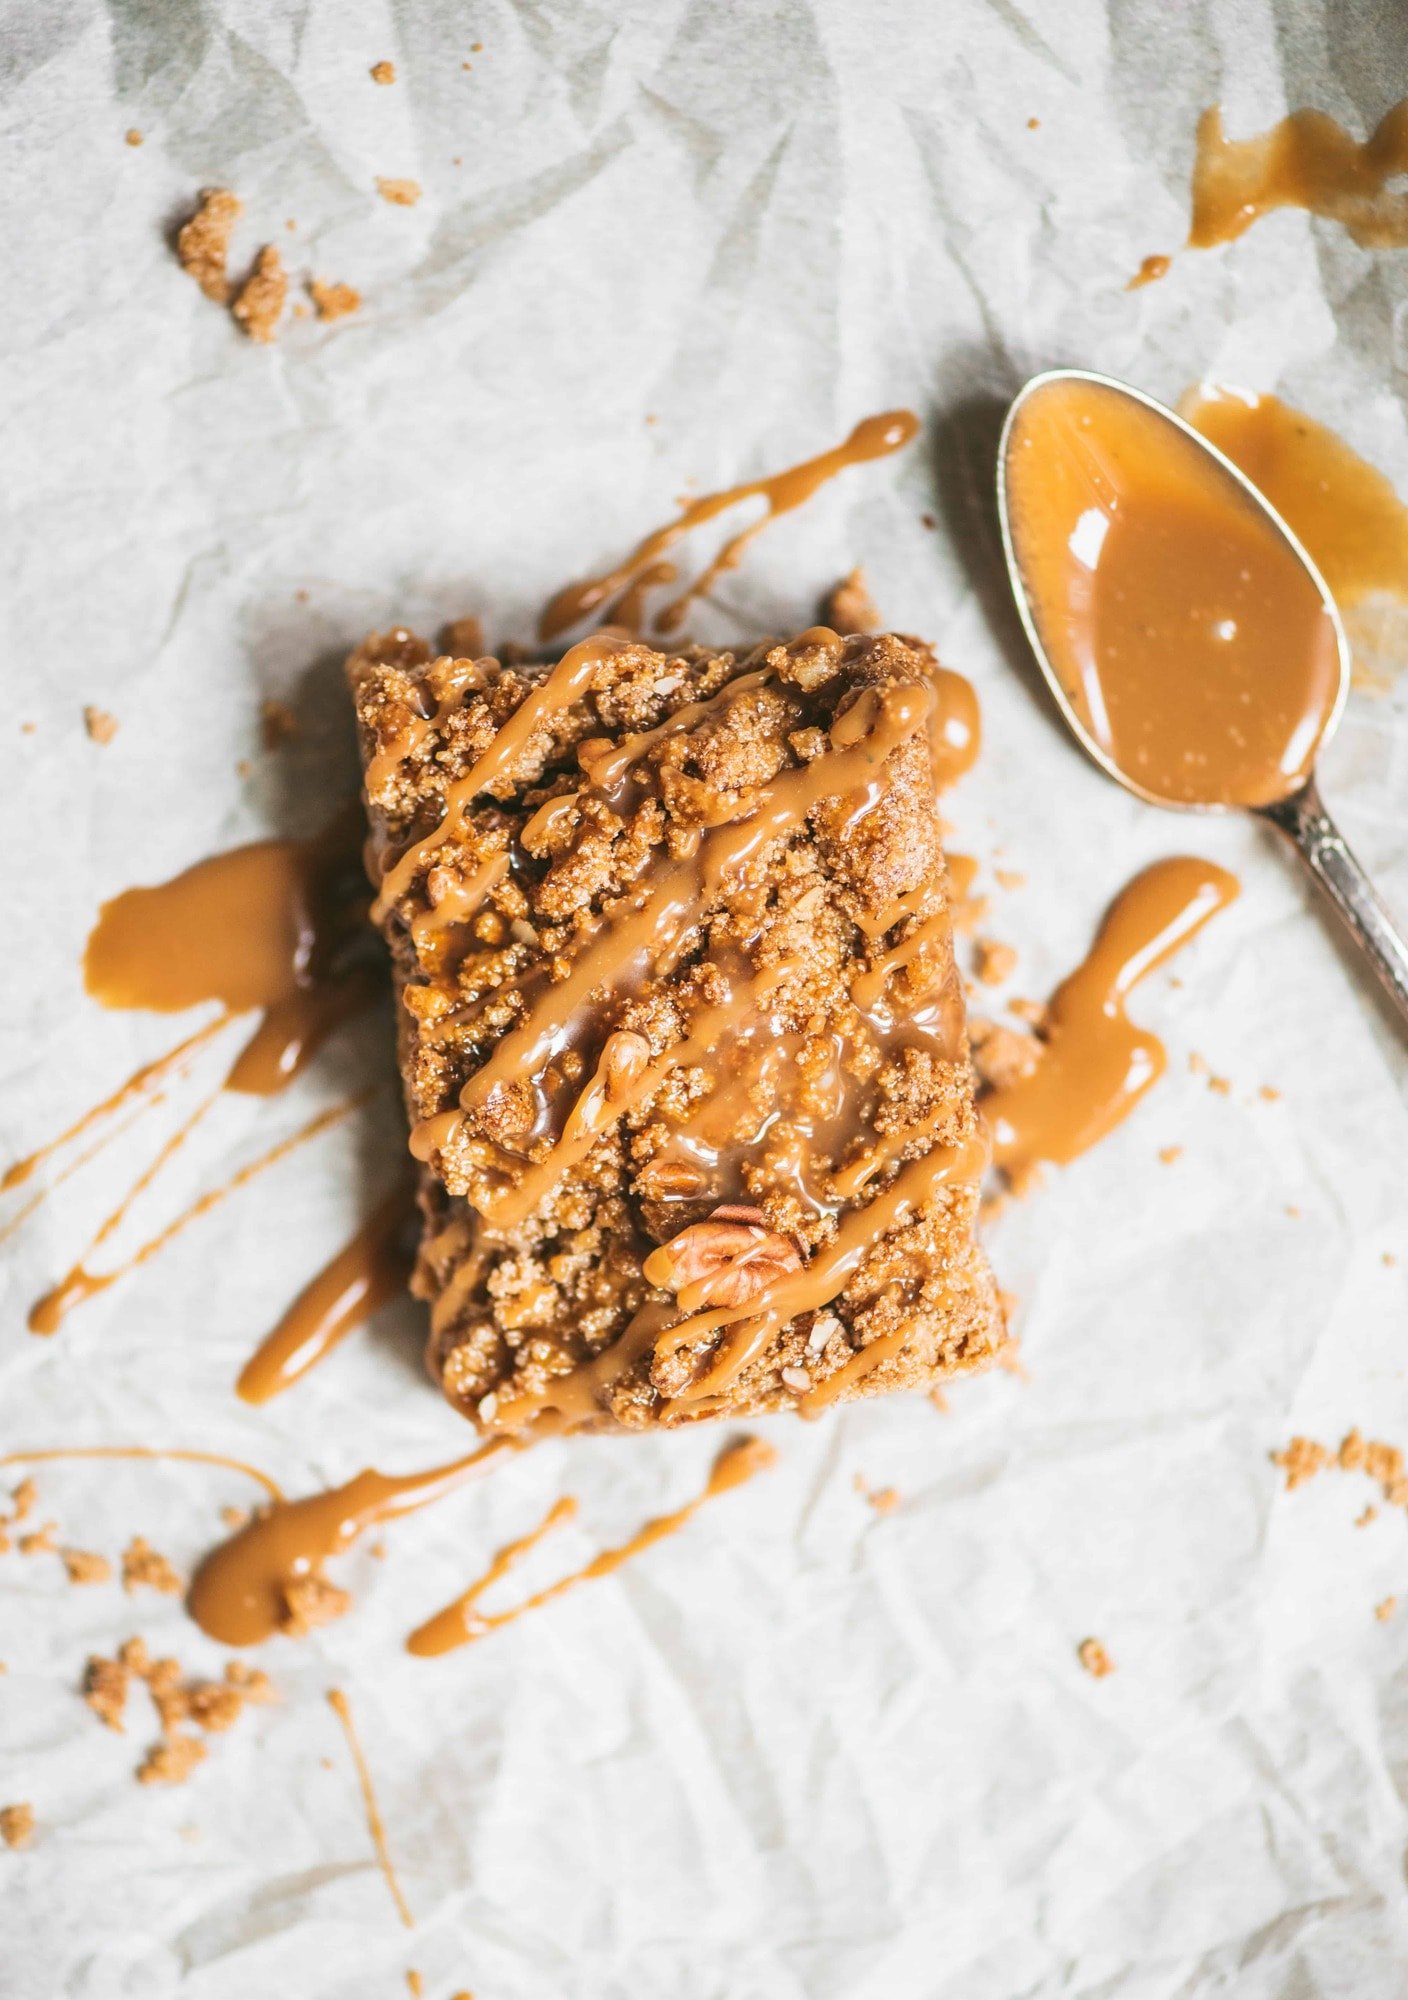 Overhead of vegan apple pie crumble bar drizzled with caramel on parchment paper